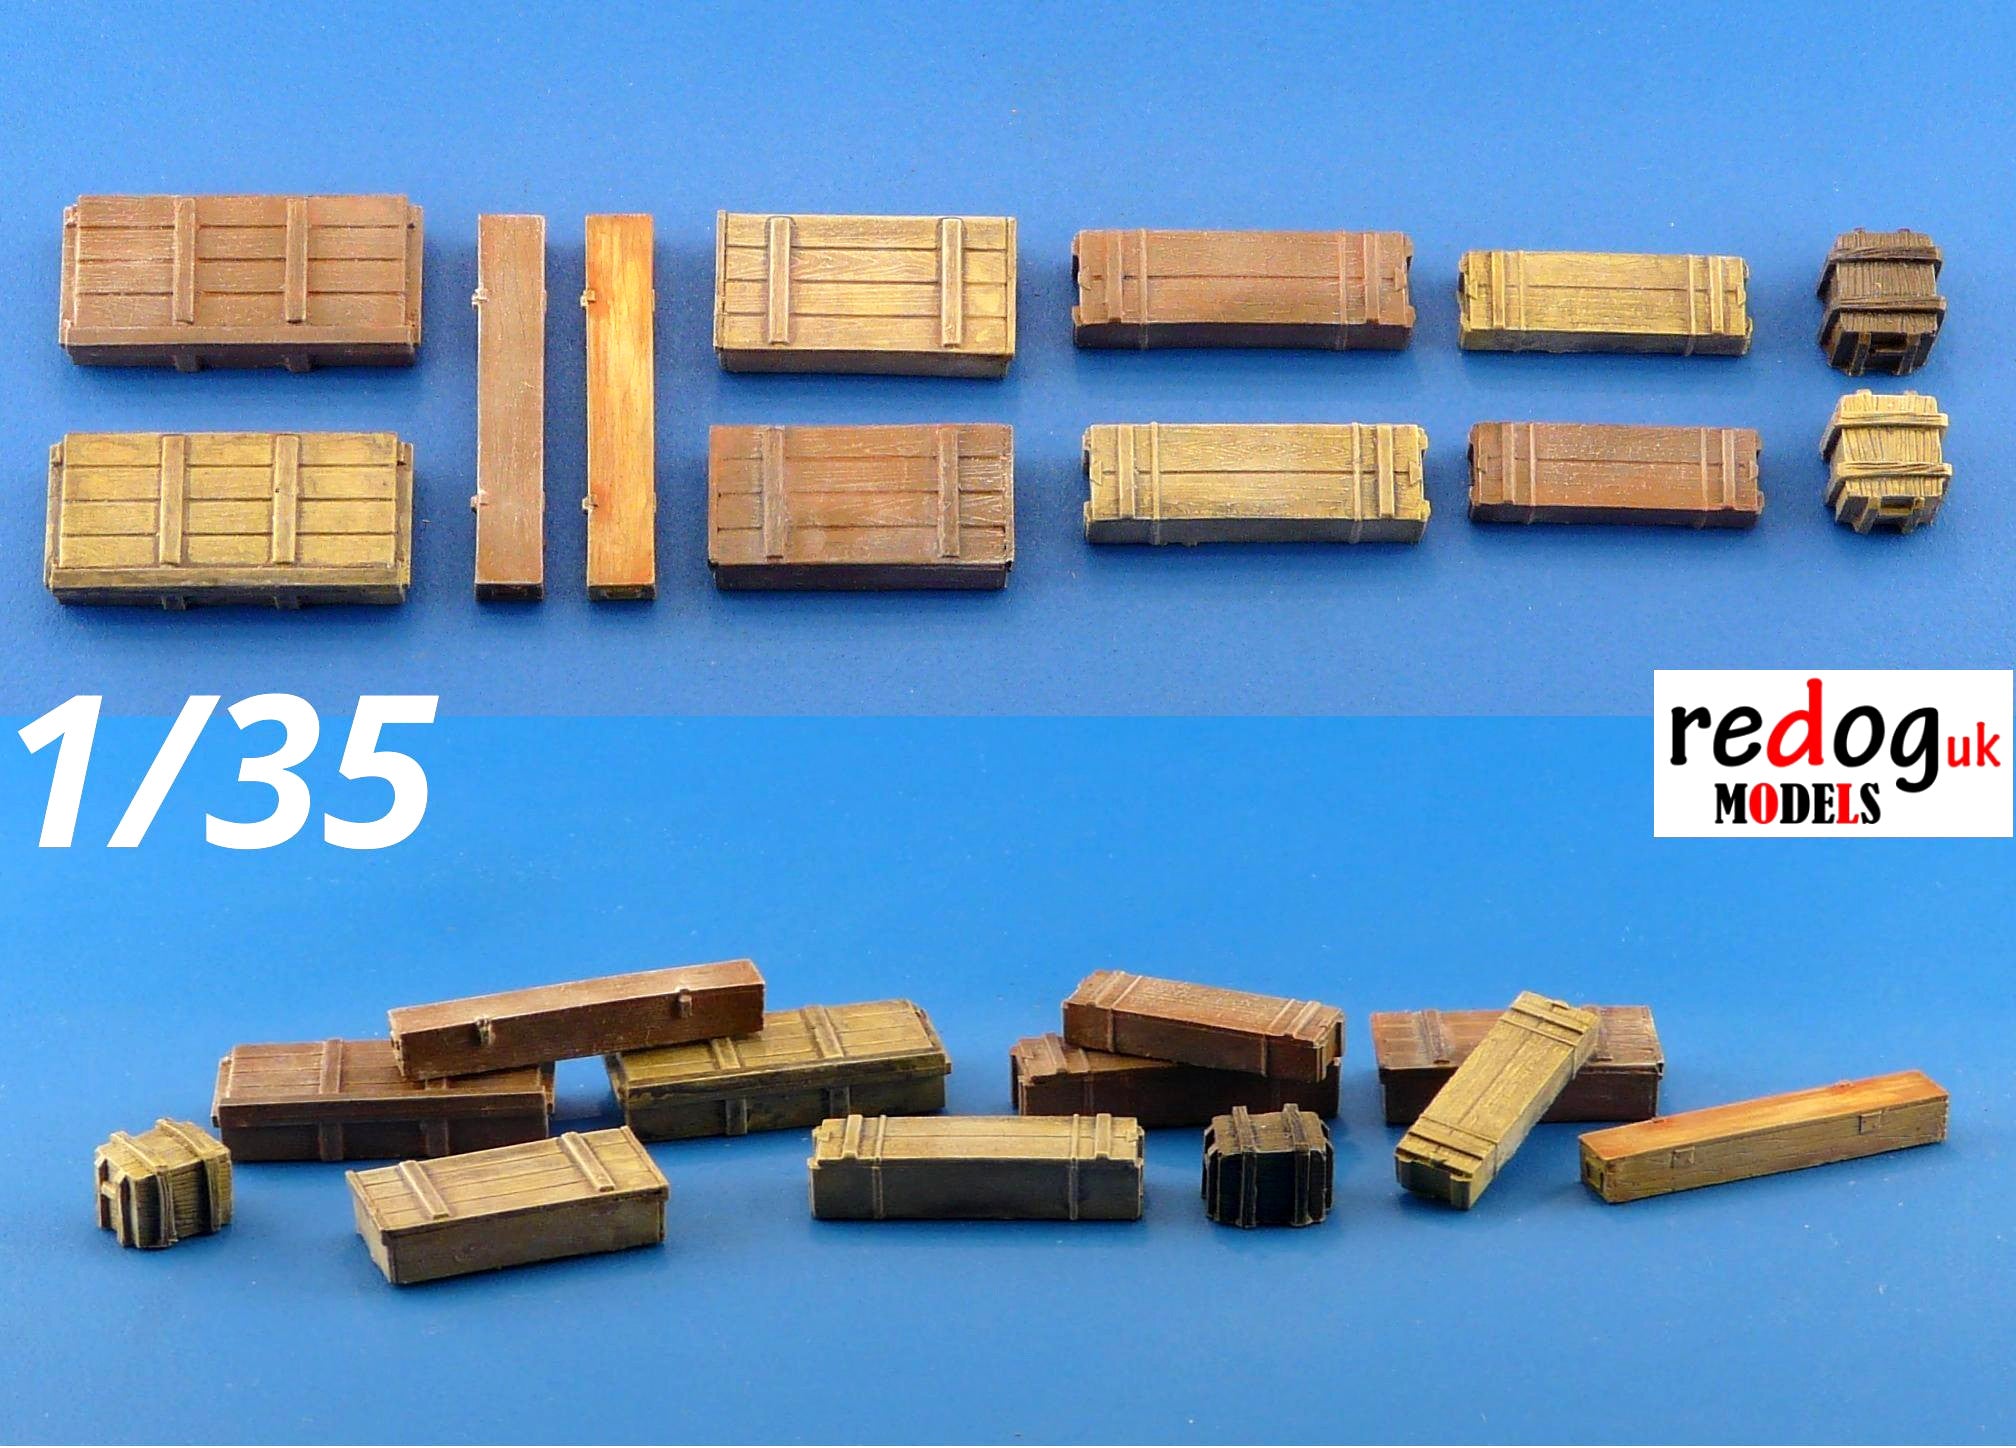 1/35 Allied and Germans Ammunition Crates Scale Modeling Military Stowage - 12 pieces B5 - redoguk